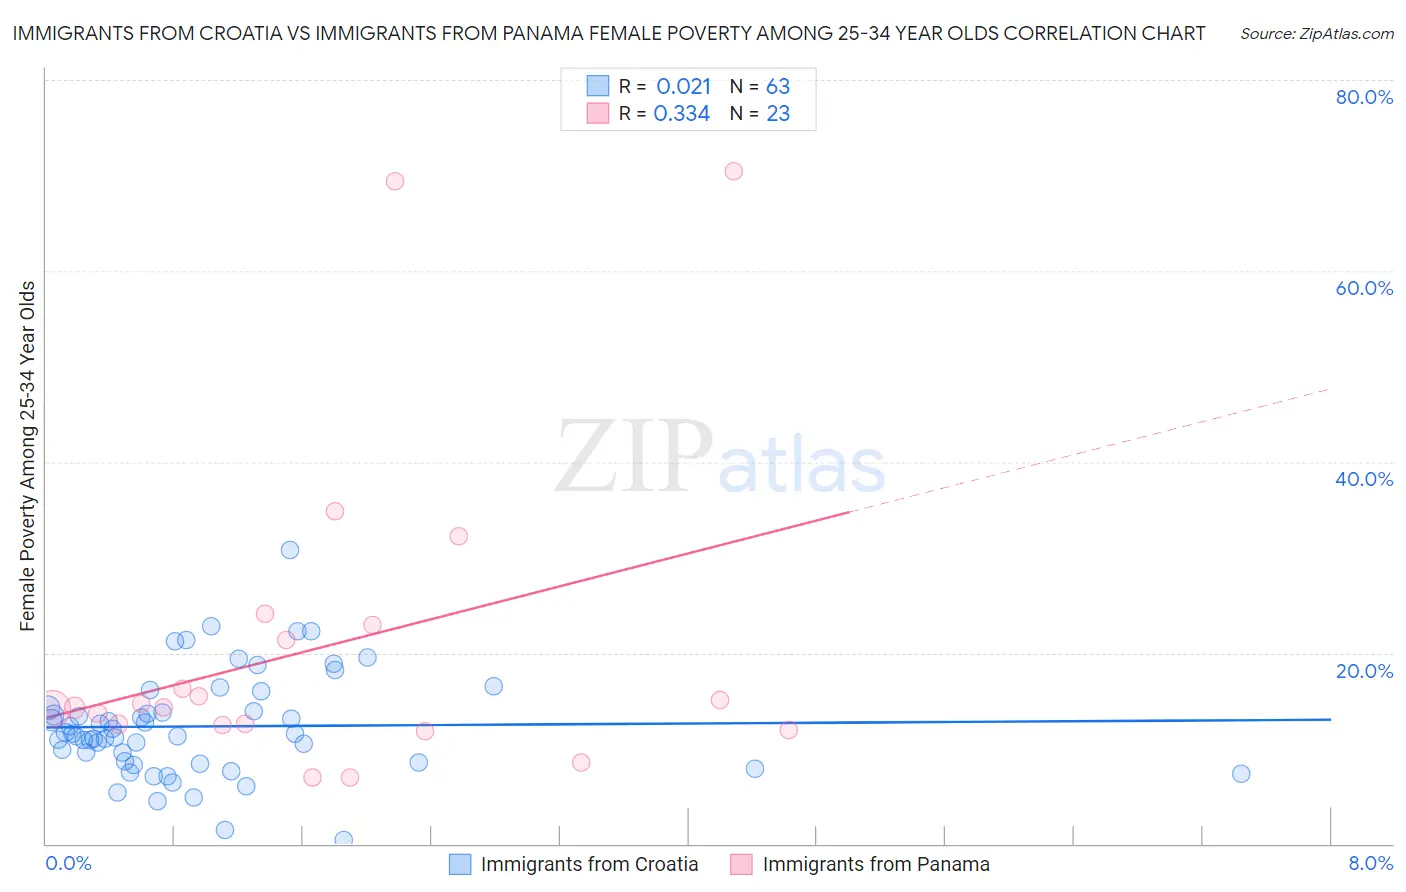 Immigrants from Croatia vs Immigrants from Panama Female Poverty Among 25-34 Year Olds